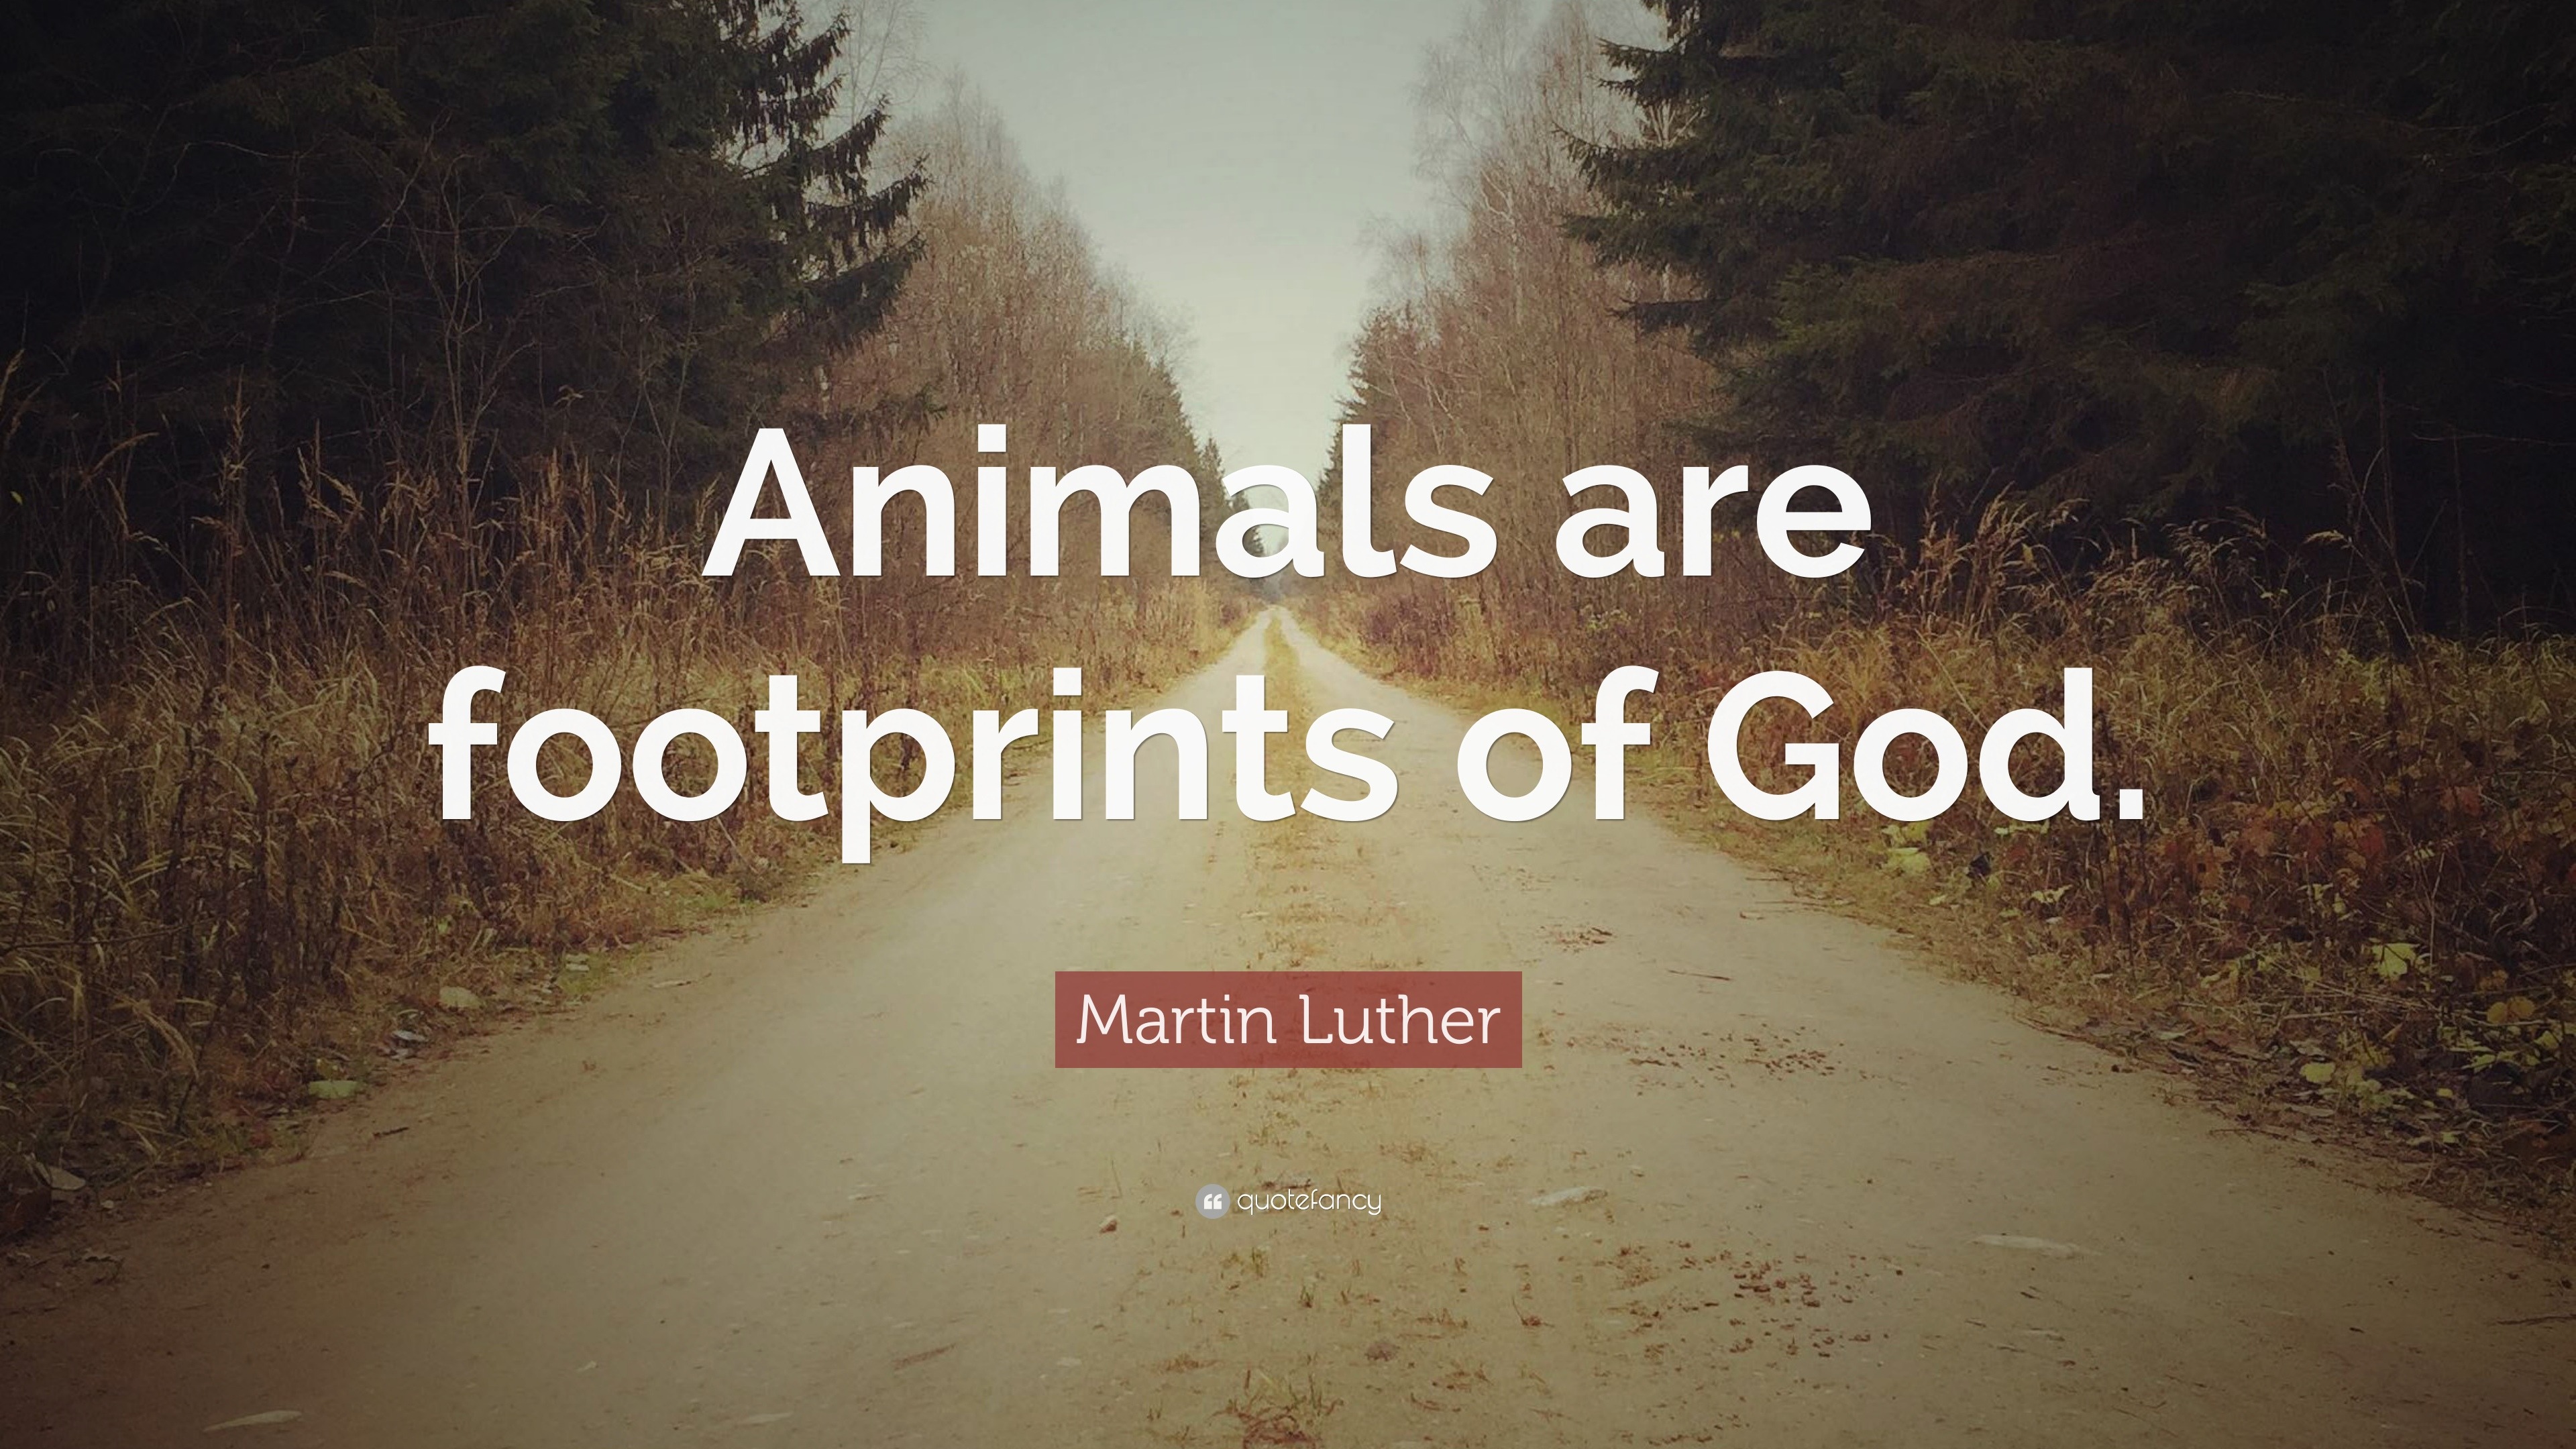 Martin Luther Quote: “Animals are footprints of God.”